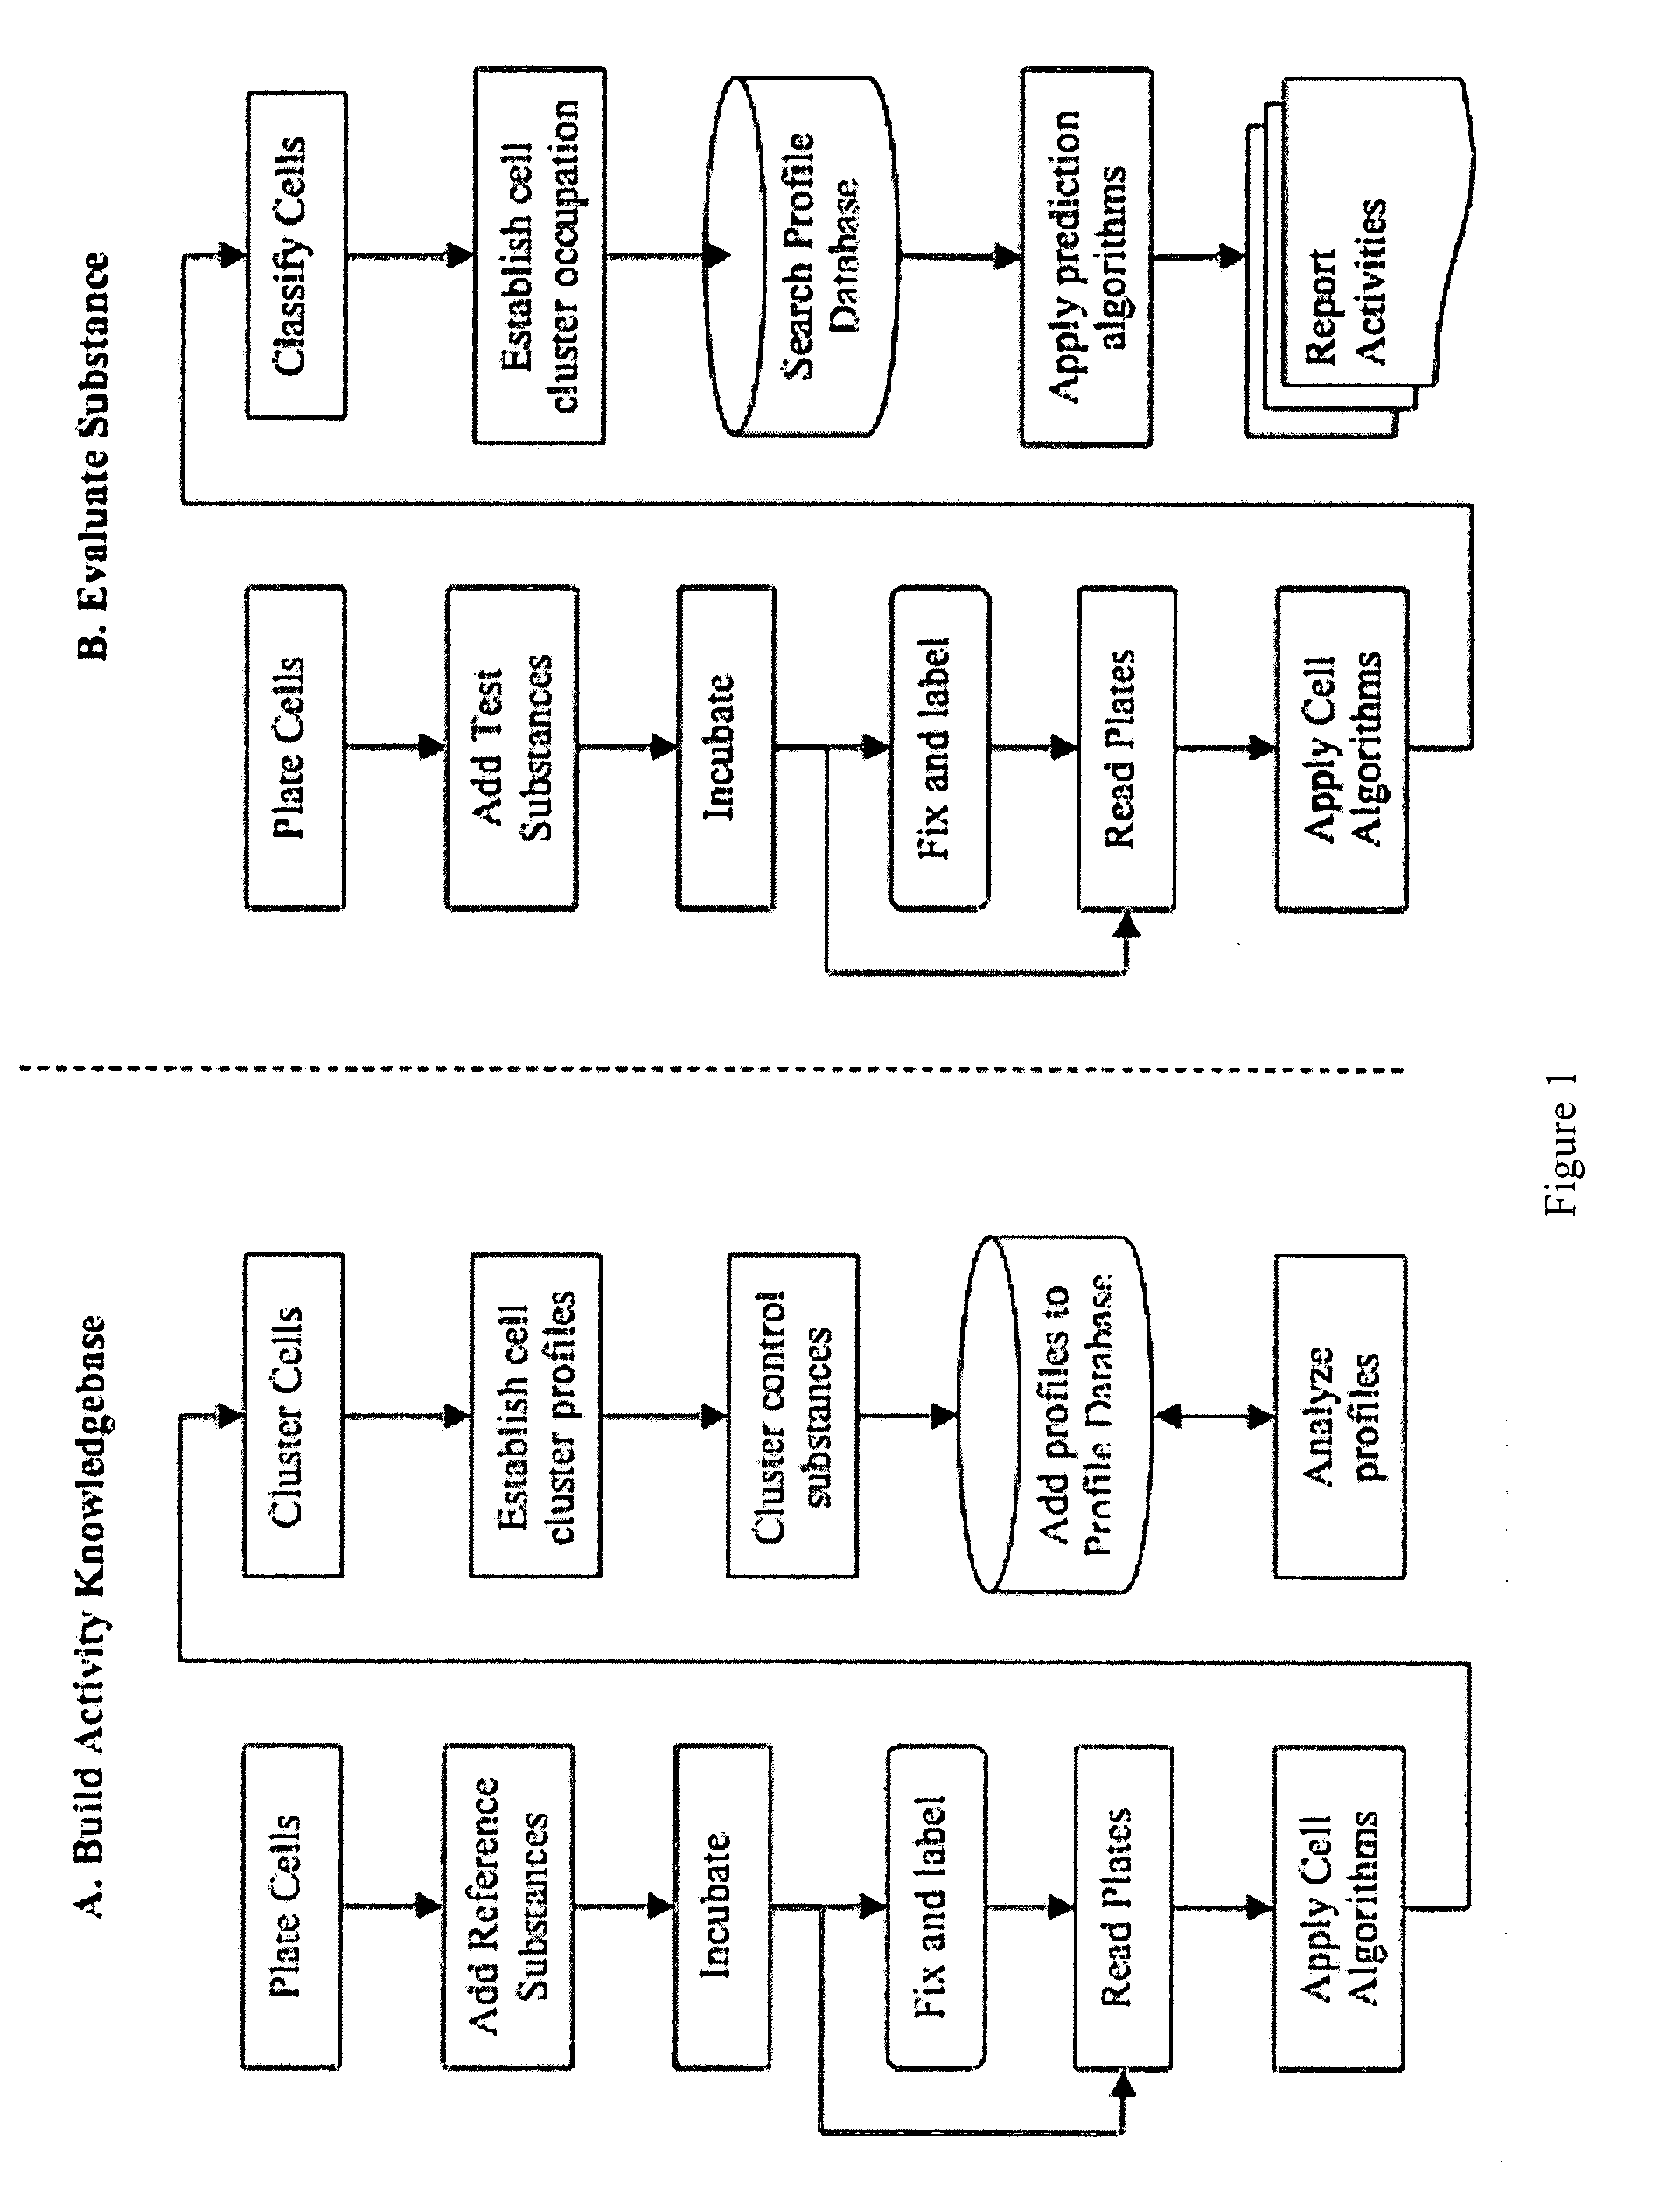 Method For Predicting Biological Systems Responses